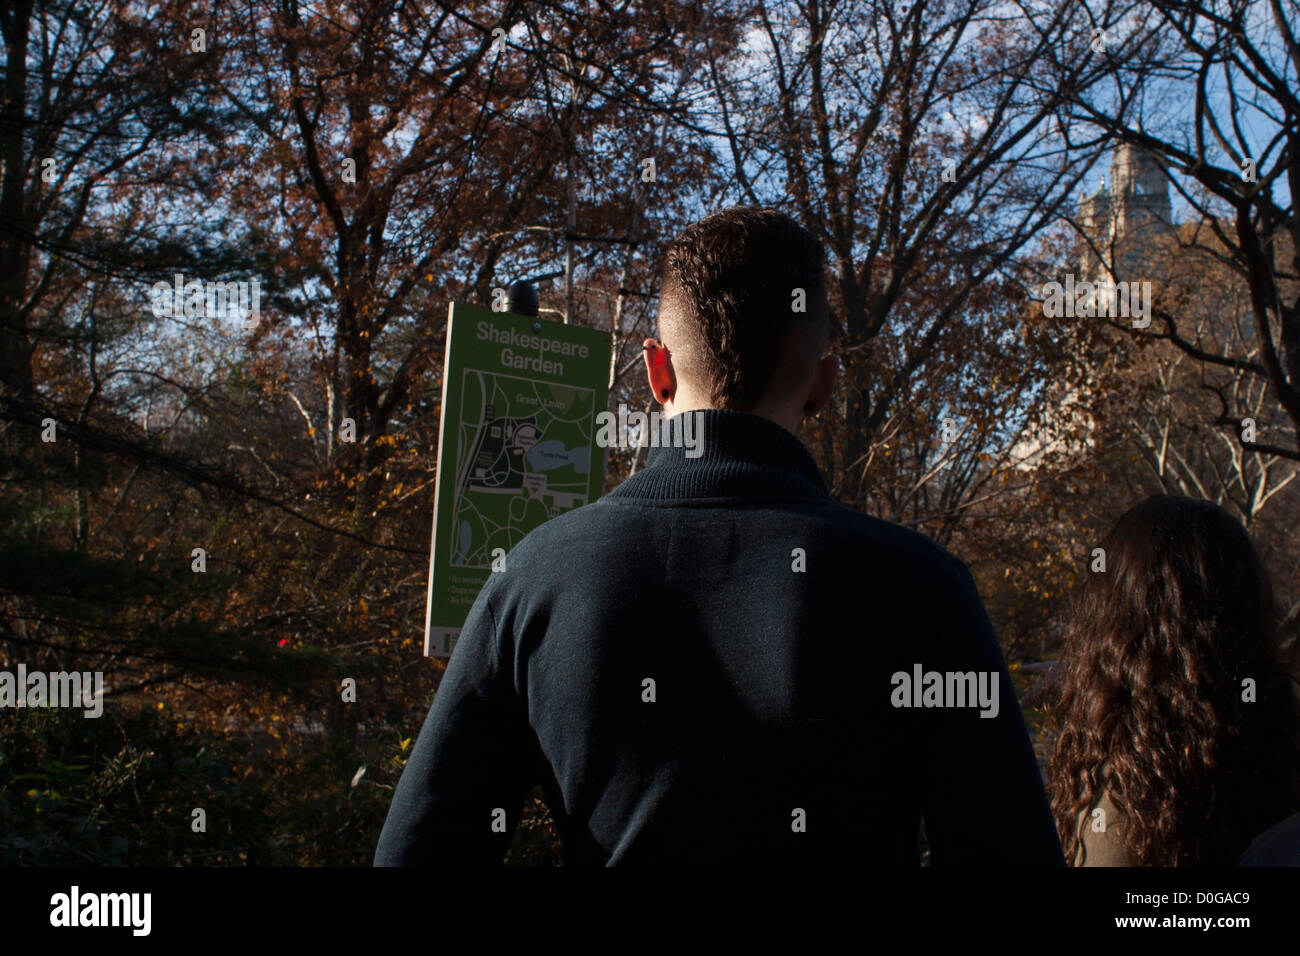 Visitors read the map posted in the Shakespeare garden in New York's Central Park. Stock Photo